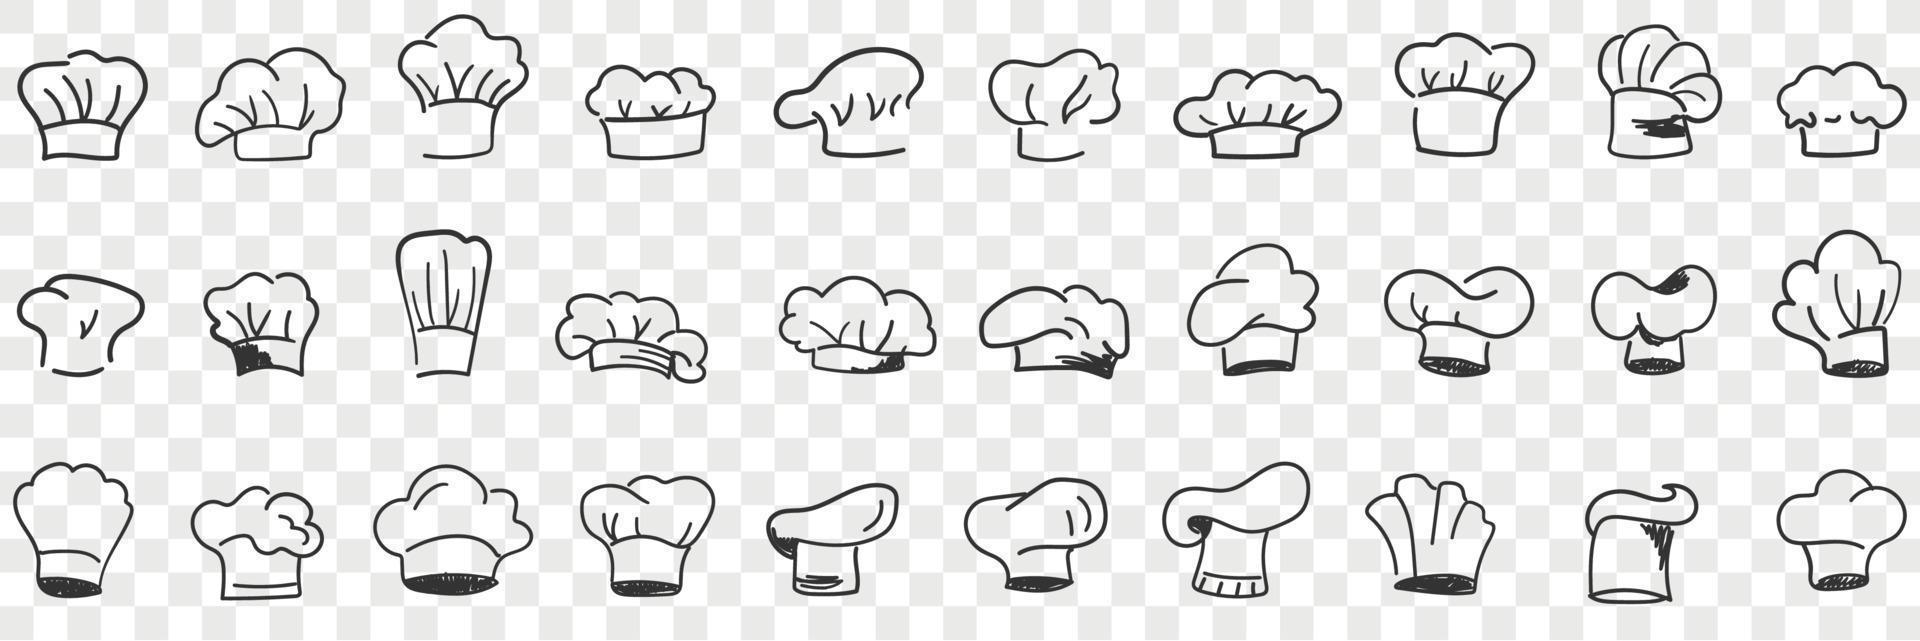 Cooks cap headdress doodle set. Collection of hand drawn various styles and shapes of hats for cook in restaurant for wearing on head personal accessories in rows isolated on transparent background vector